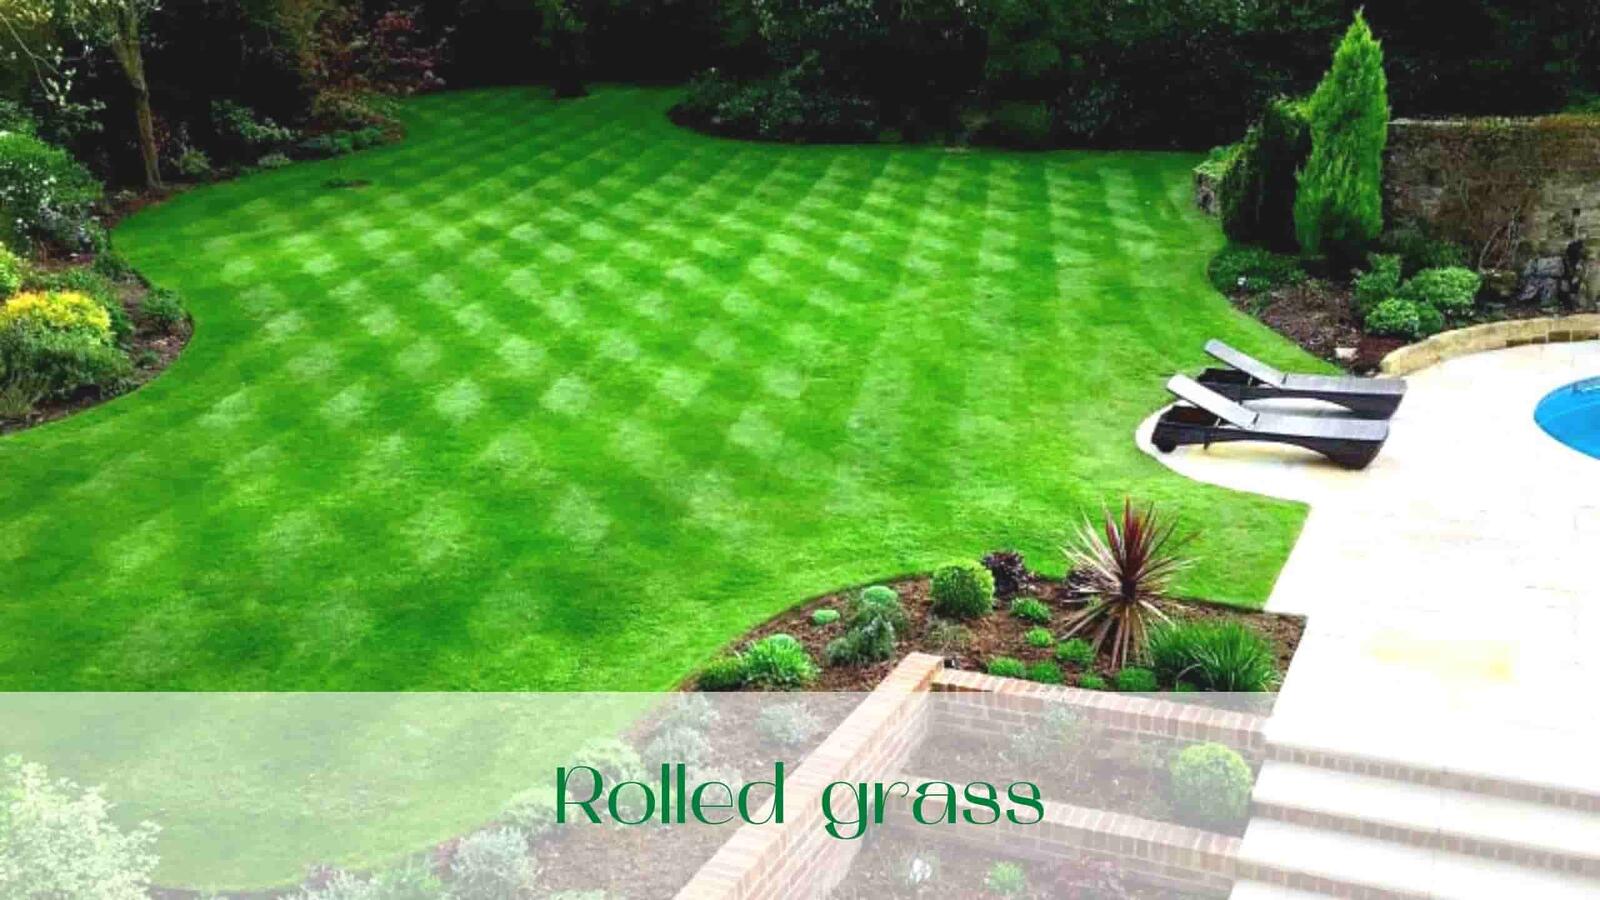 Rolled grass in Toronto and Ontario